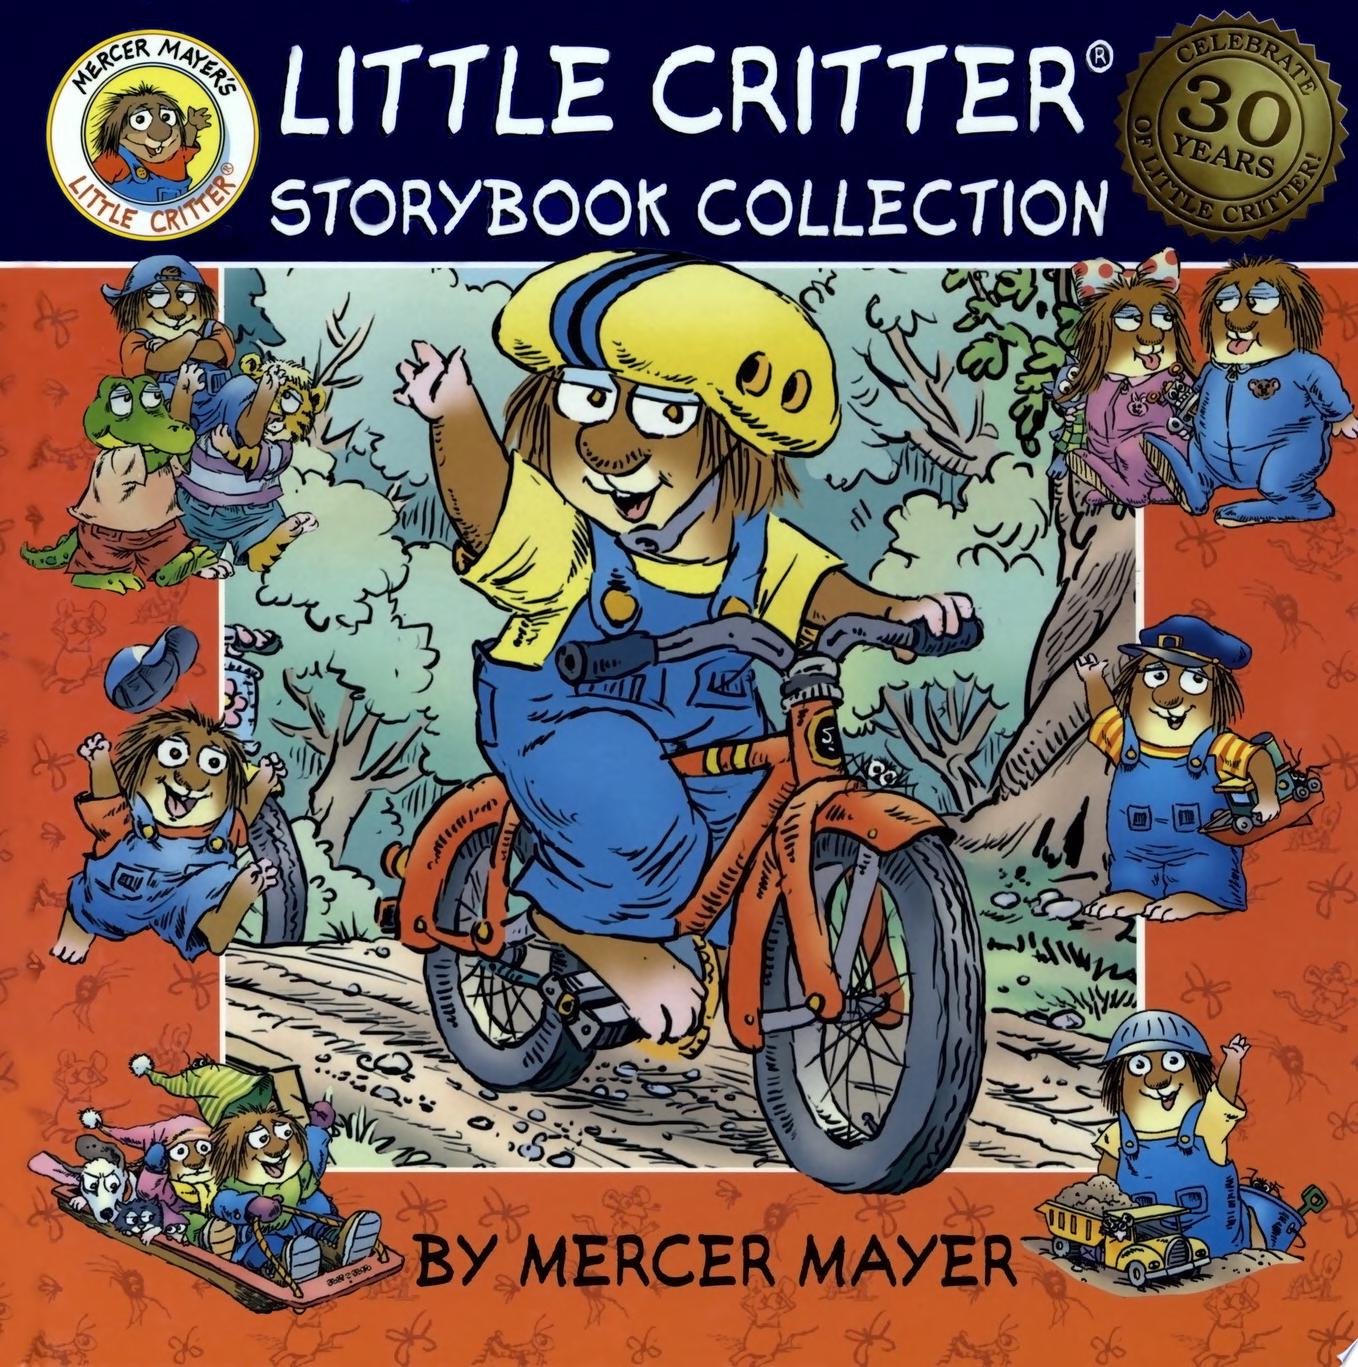 Image for "Little Critter Storybook Collection"